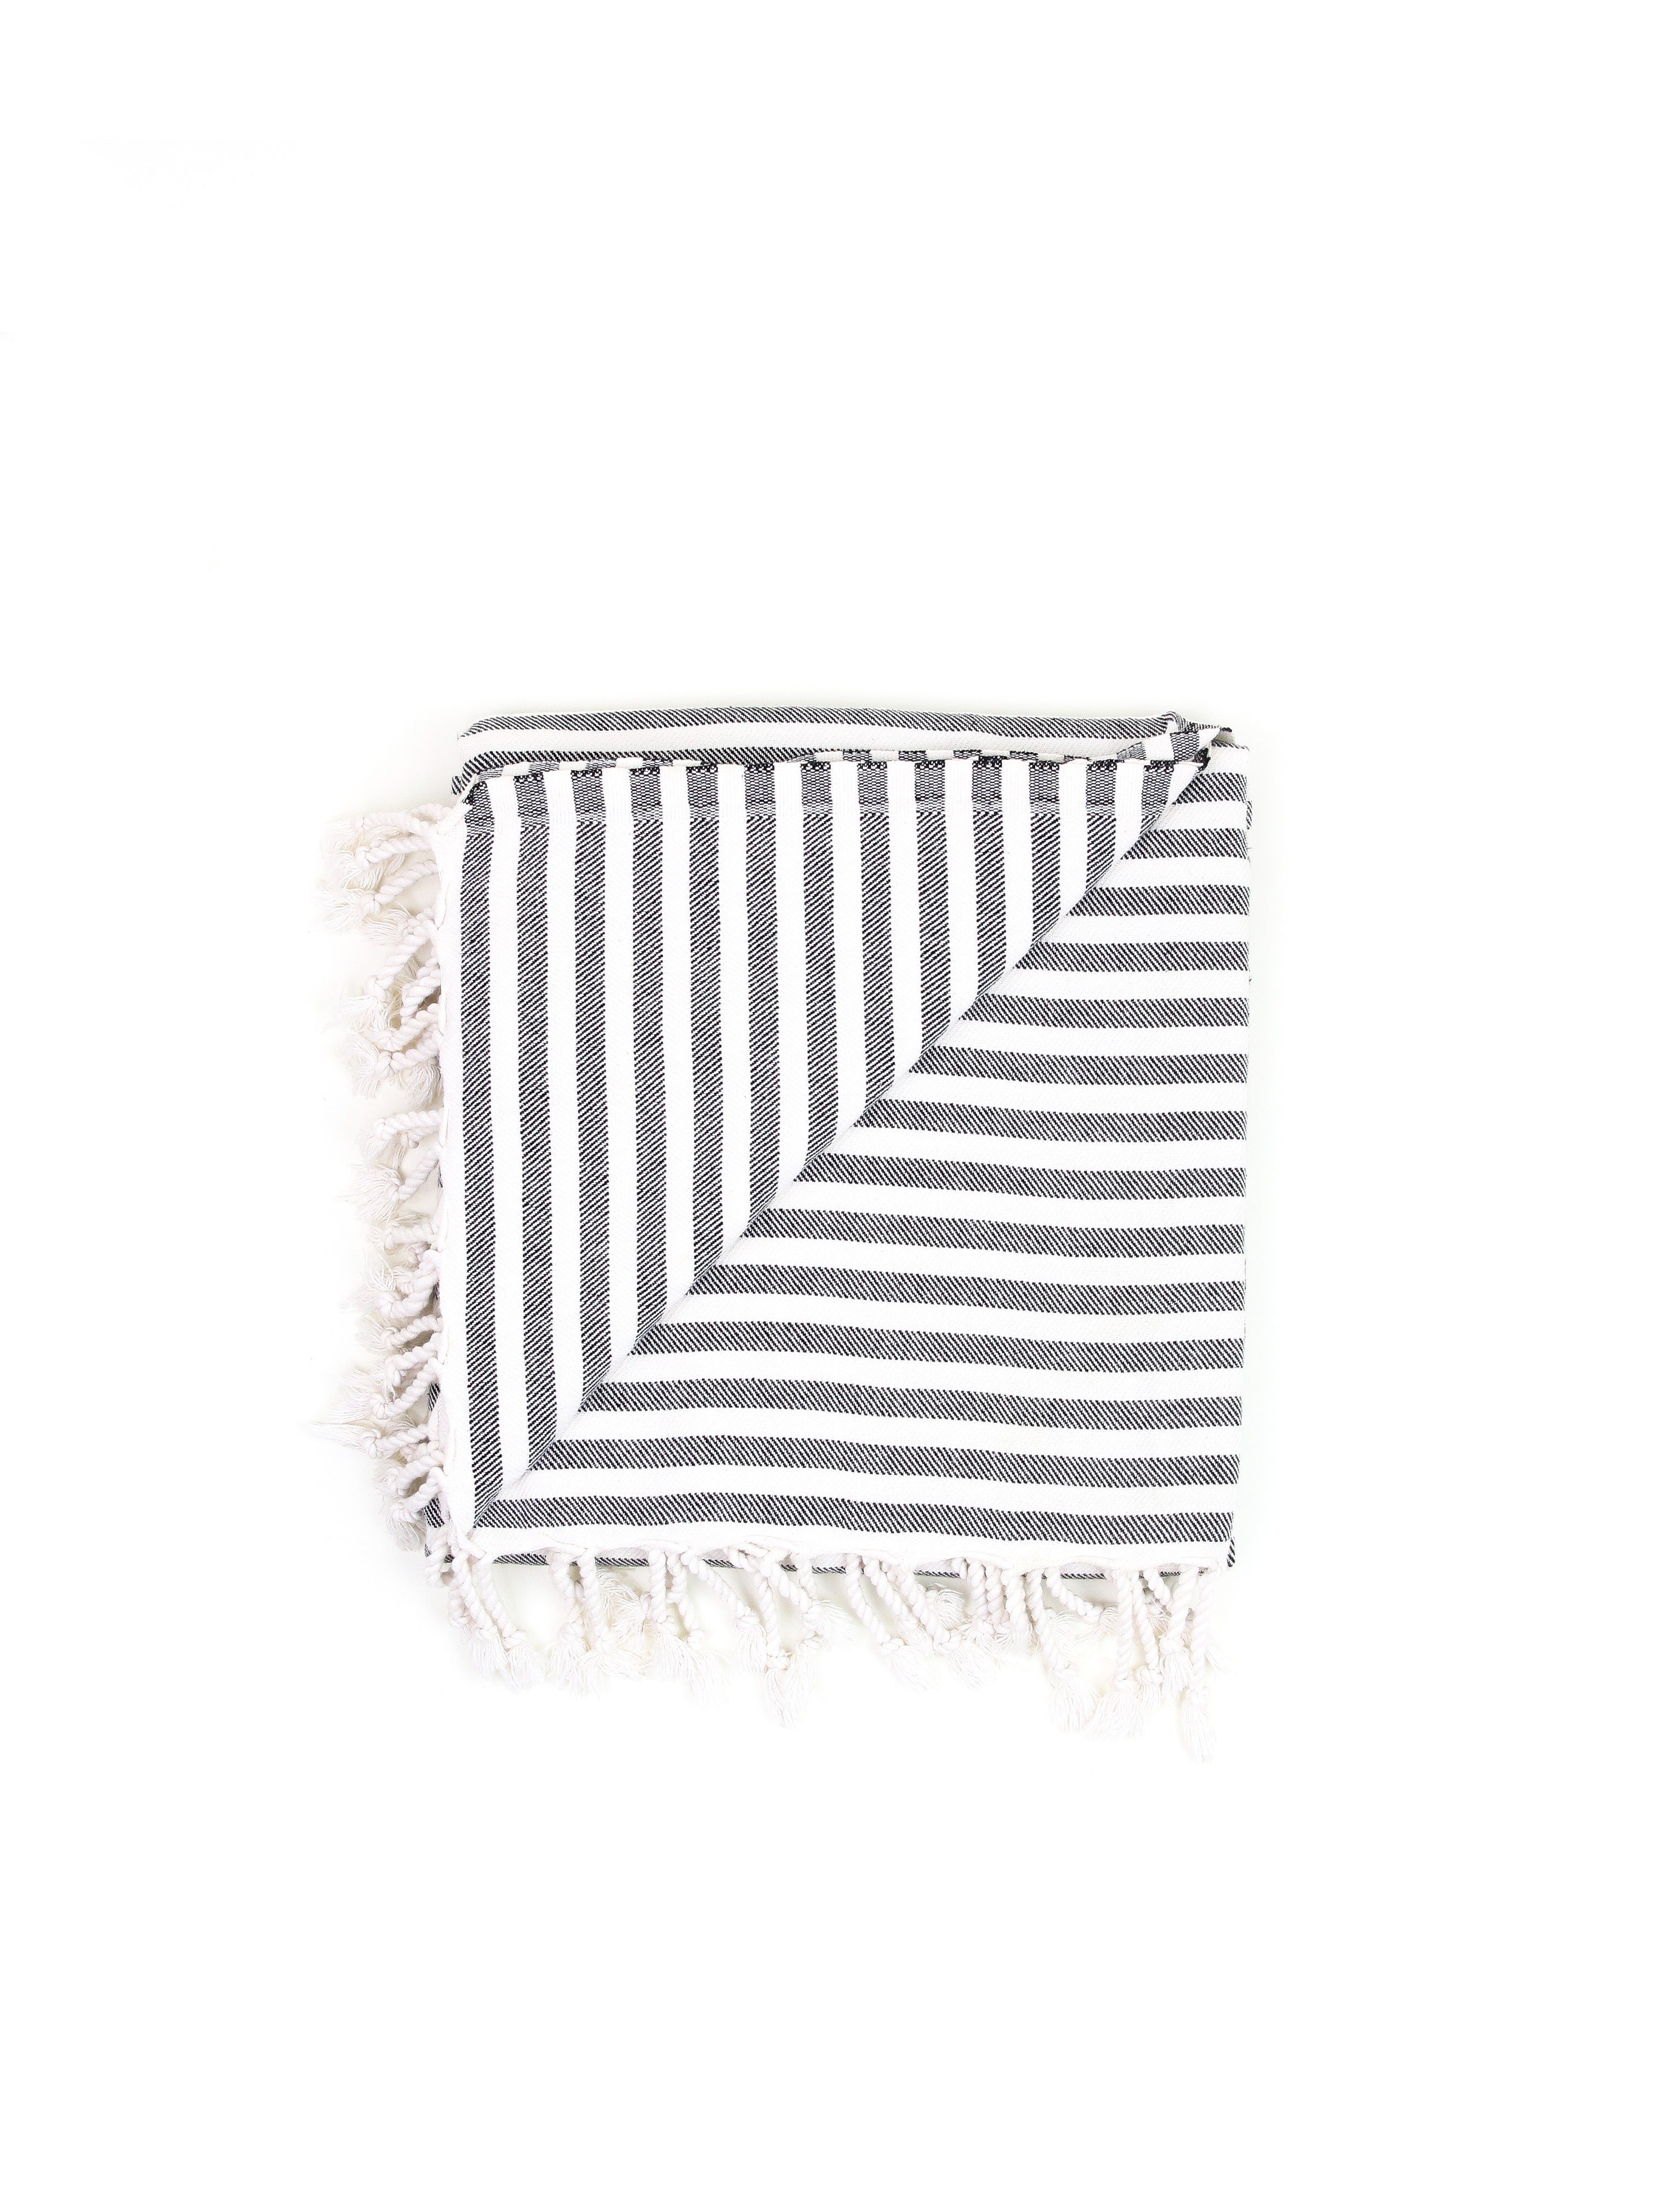  Saint-Tropez • Sand Free Beach Towel by Sunkissed Sunkissed Perfumarie